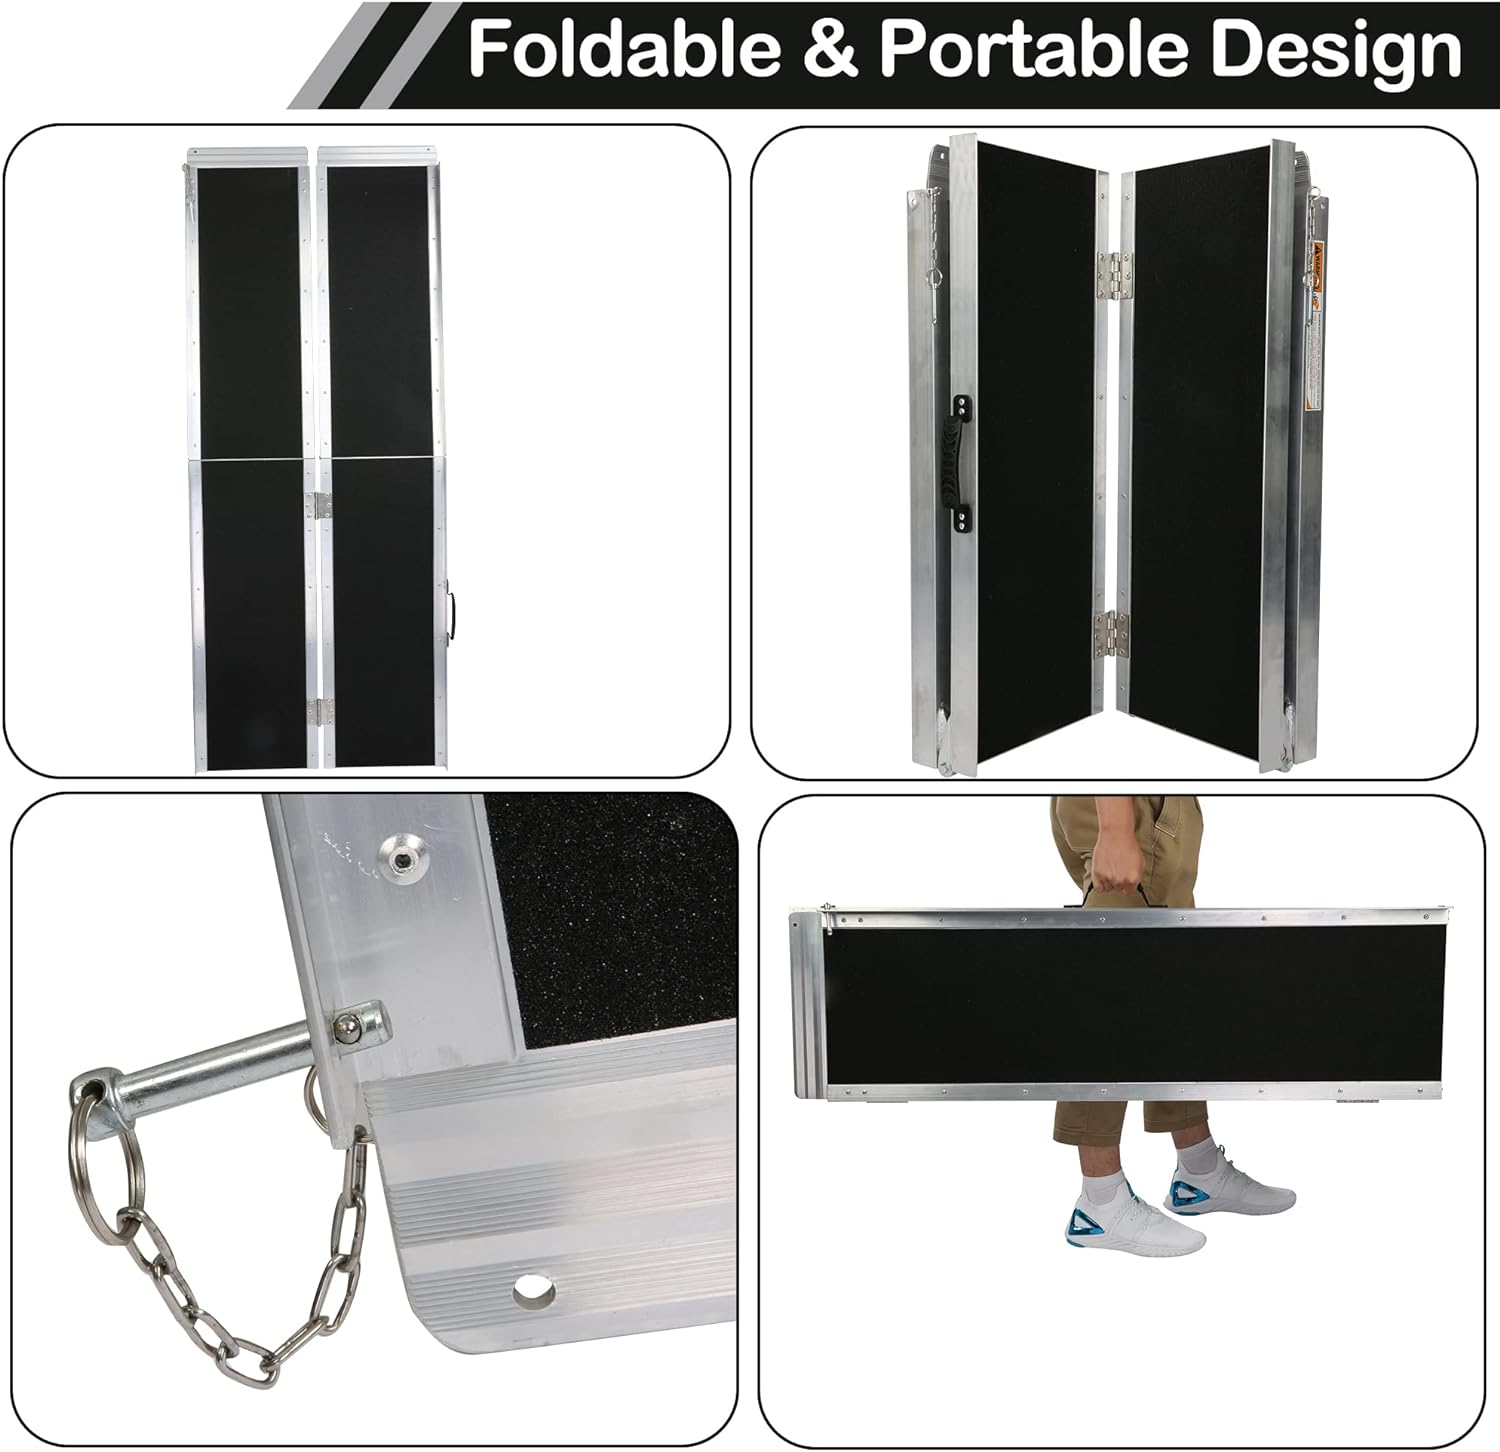 6ft Portable Ramp for Wheelchair Folding Aluminum Alloy Ramp with Handle